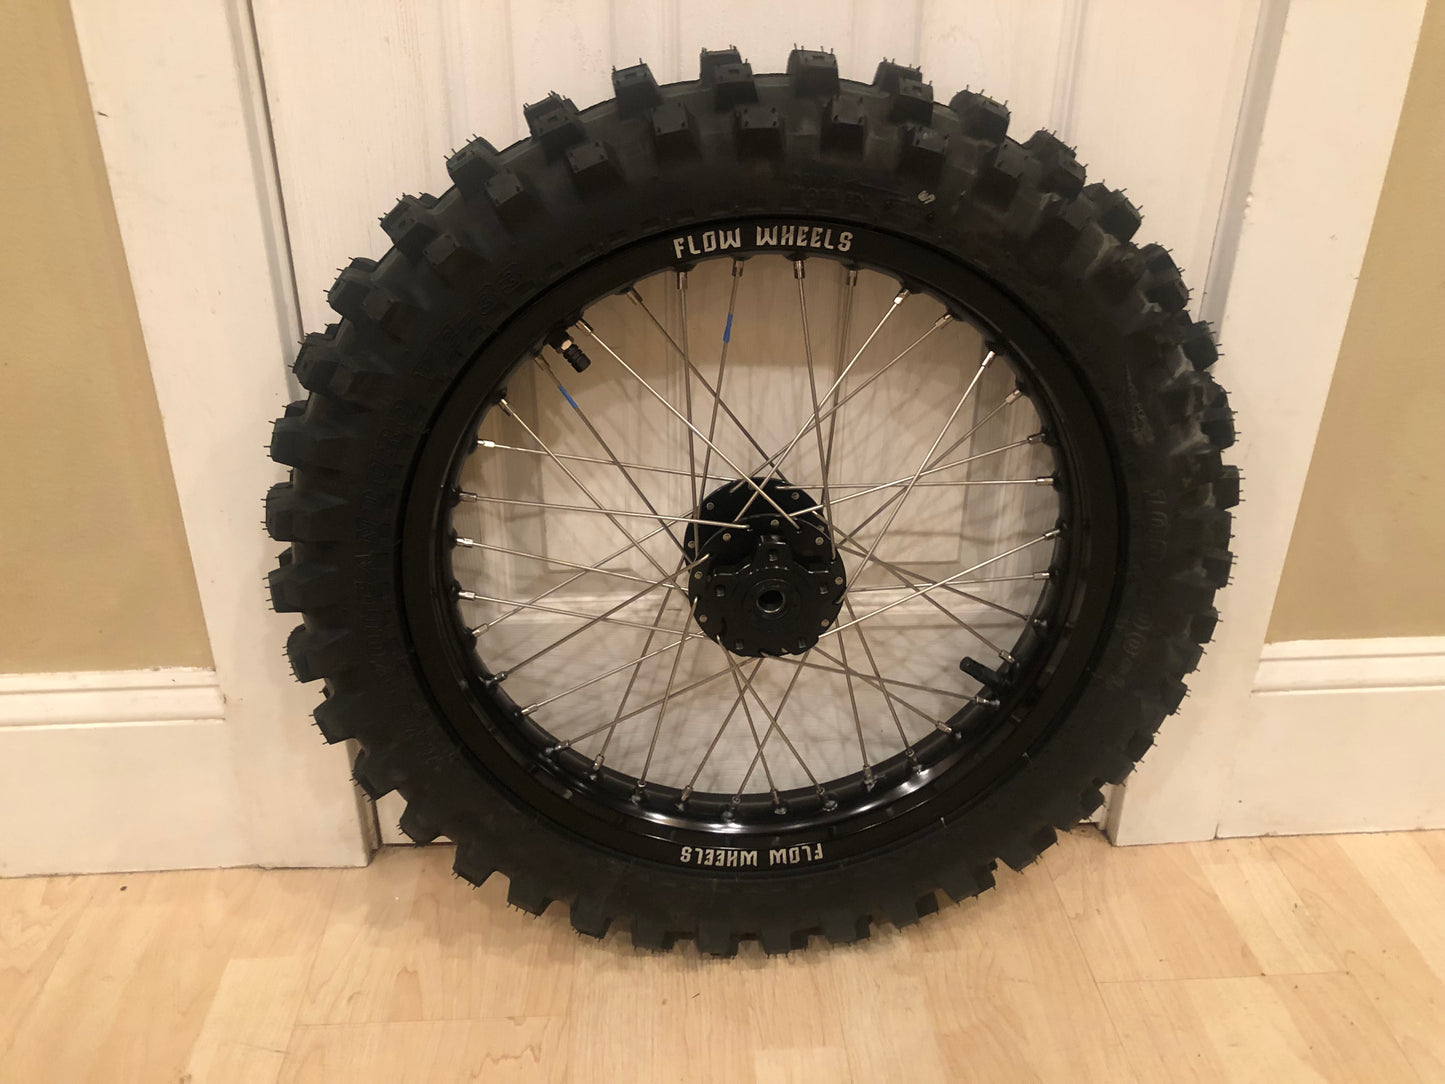 Talaria Sting 17 inch rear wheel with 100 wide tire!